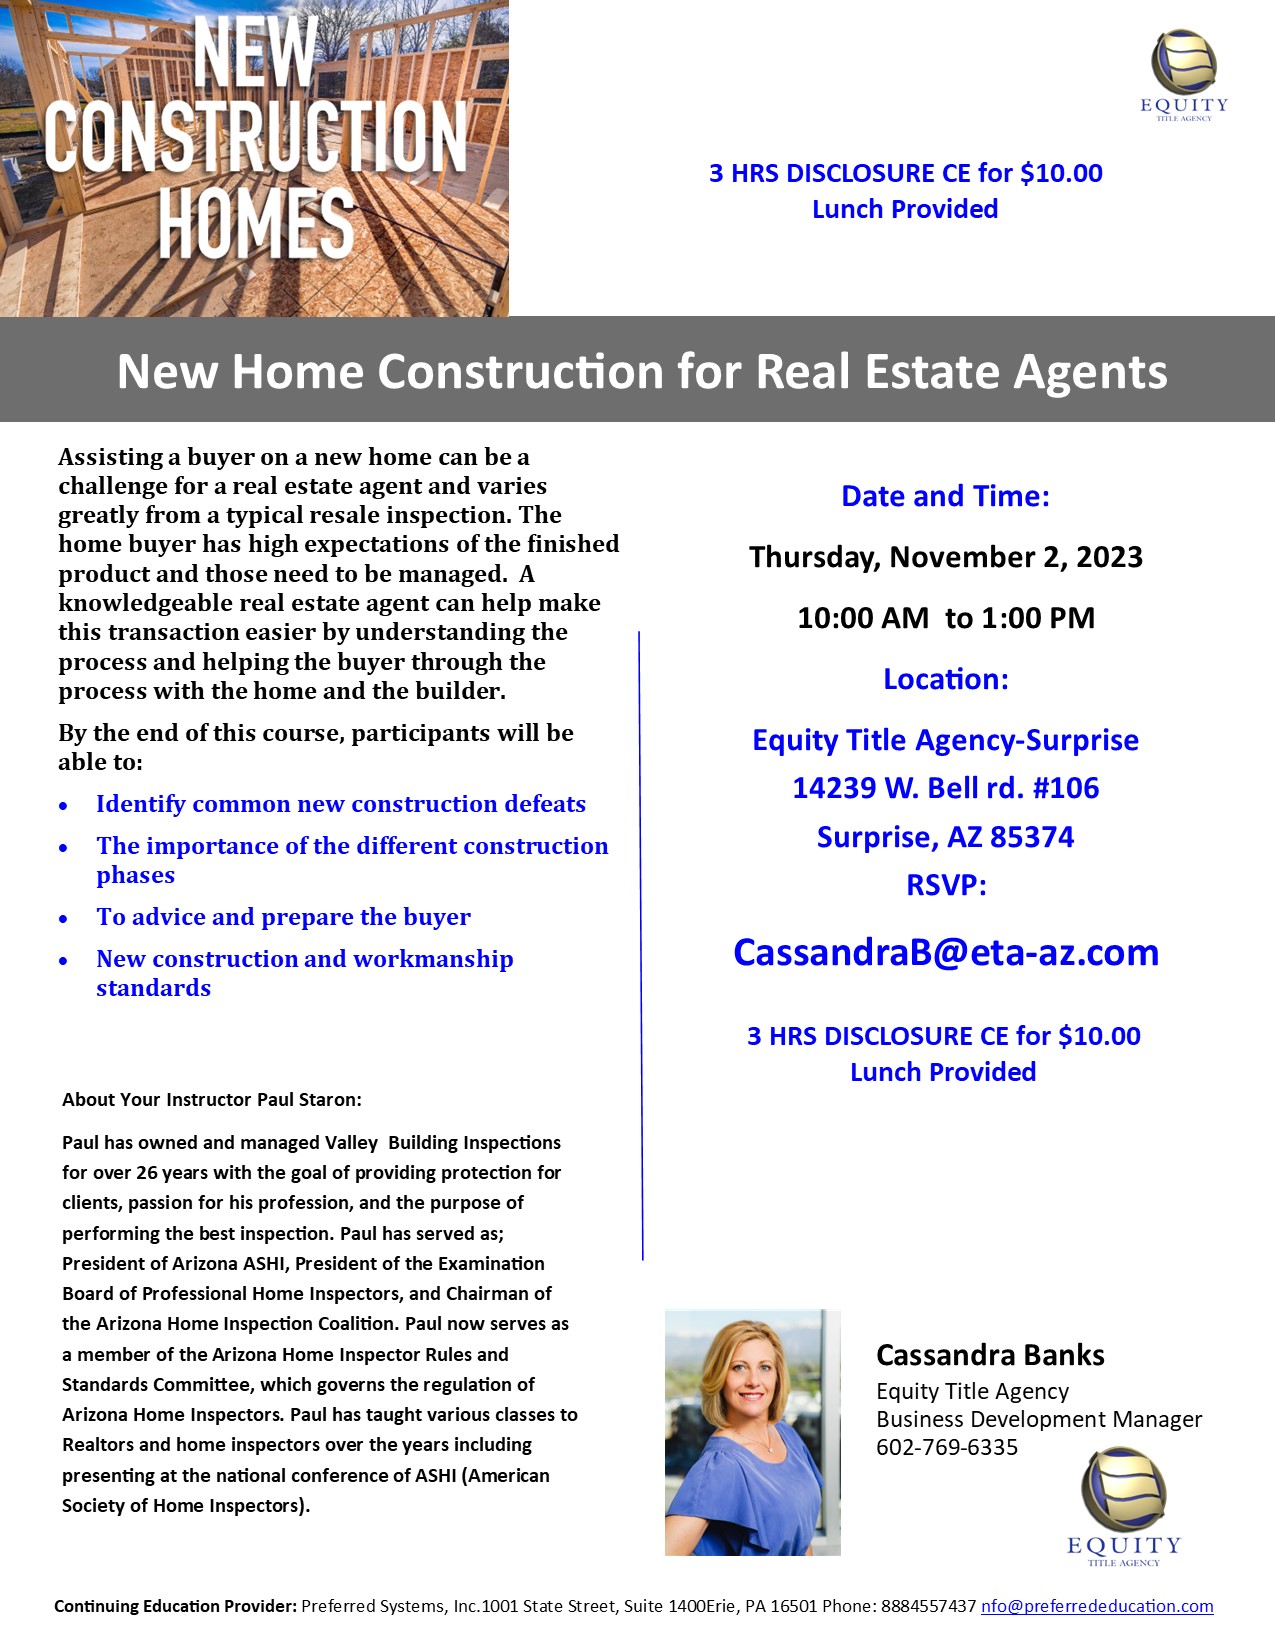 New Home Construction for Real Estate Agents